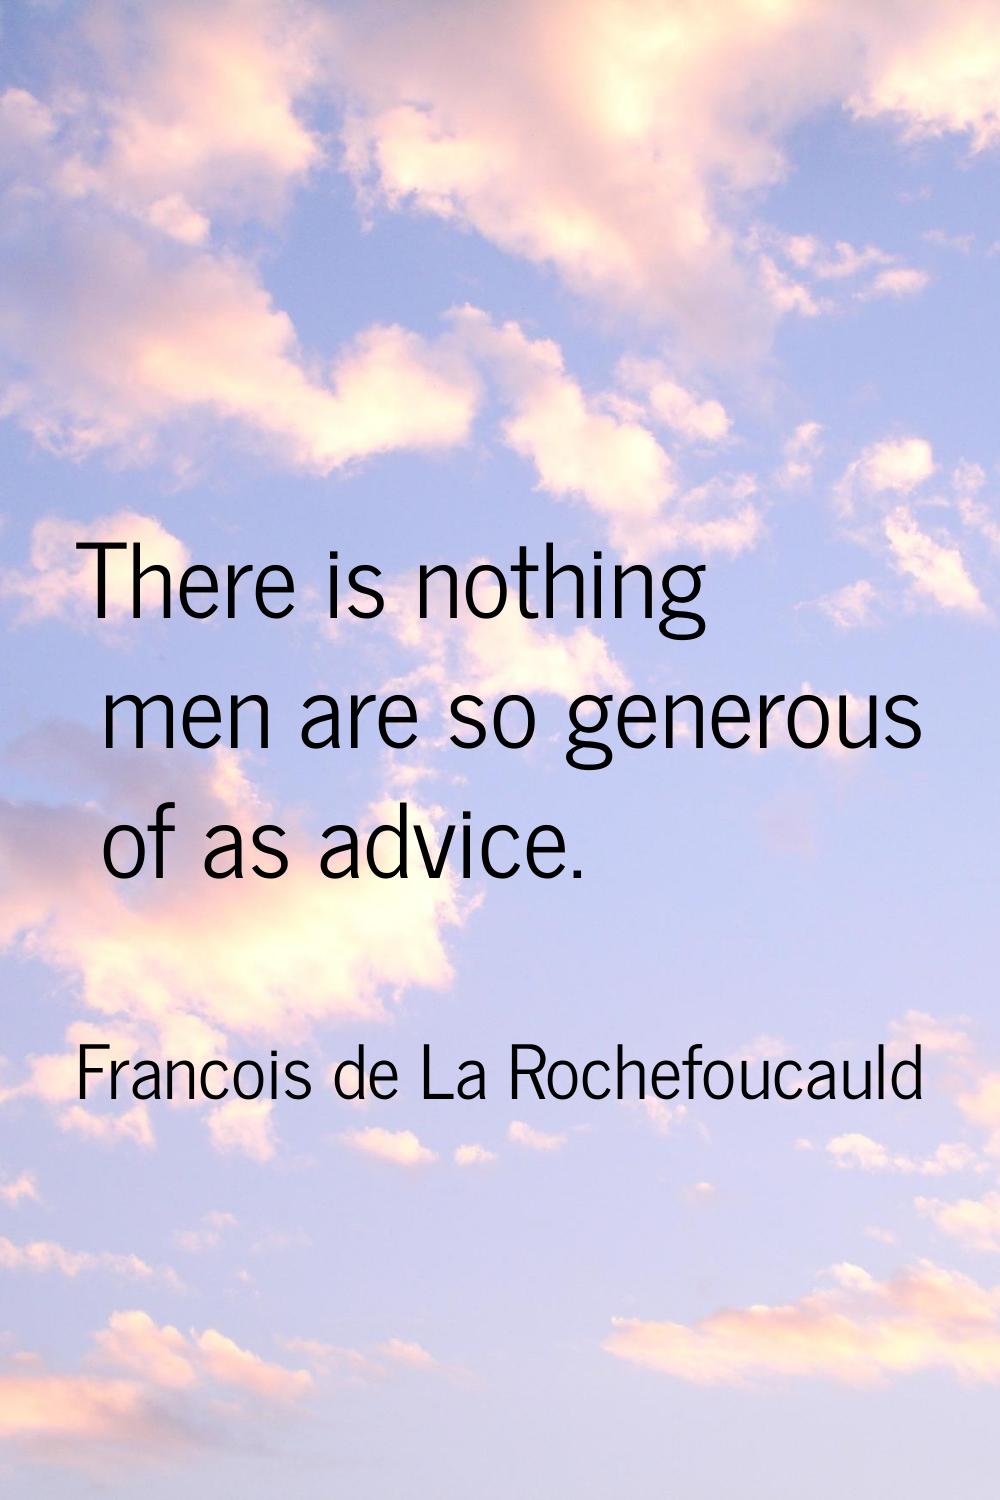 There is nothing men are so generous of as advice.